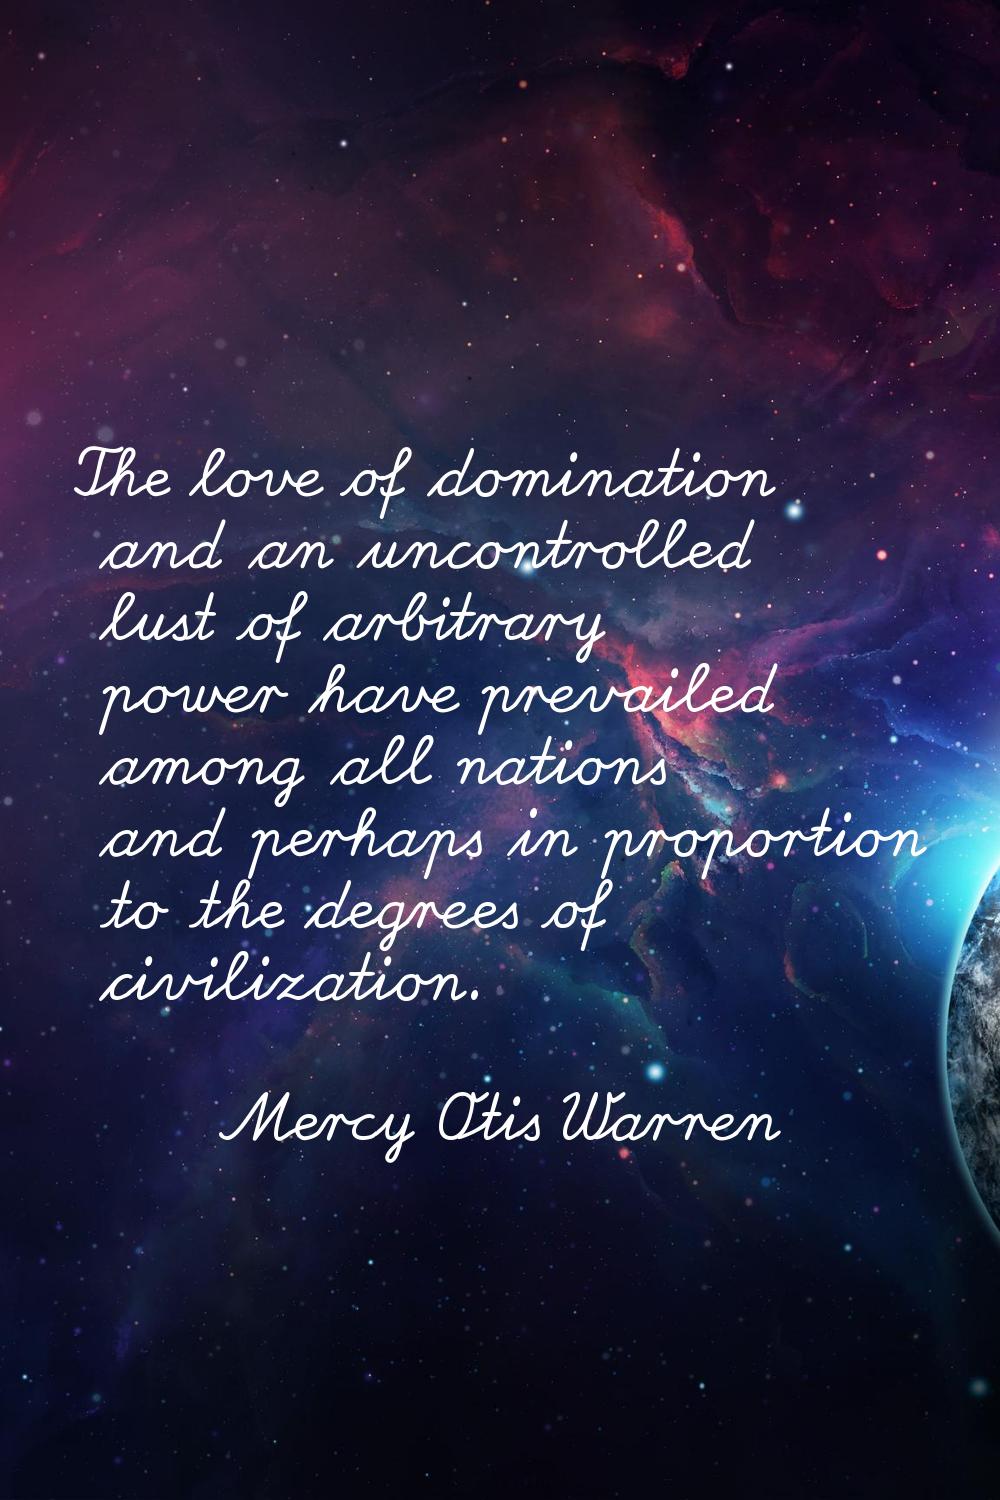 The love of domination and an uncontrolled lust of arbitrary power have prevailed among all nations